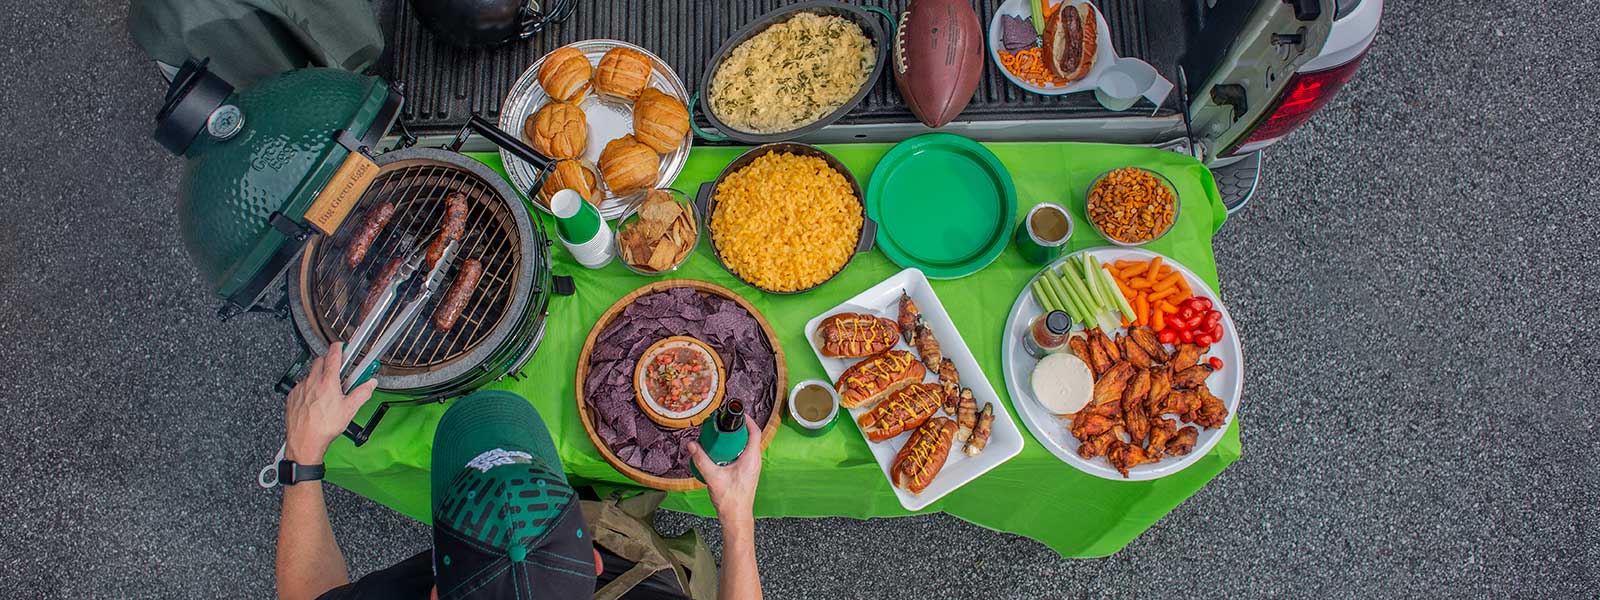 Tailgating on the Big Green Egg